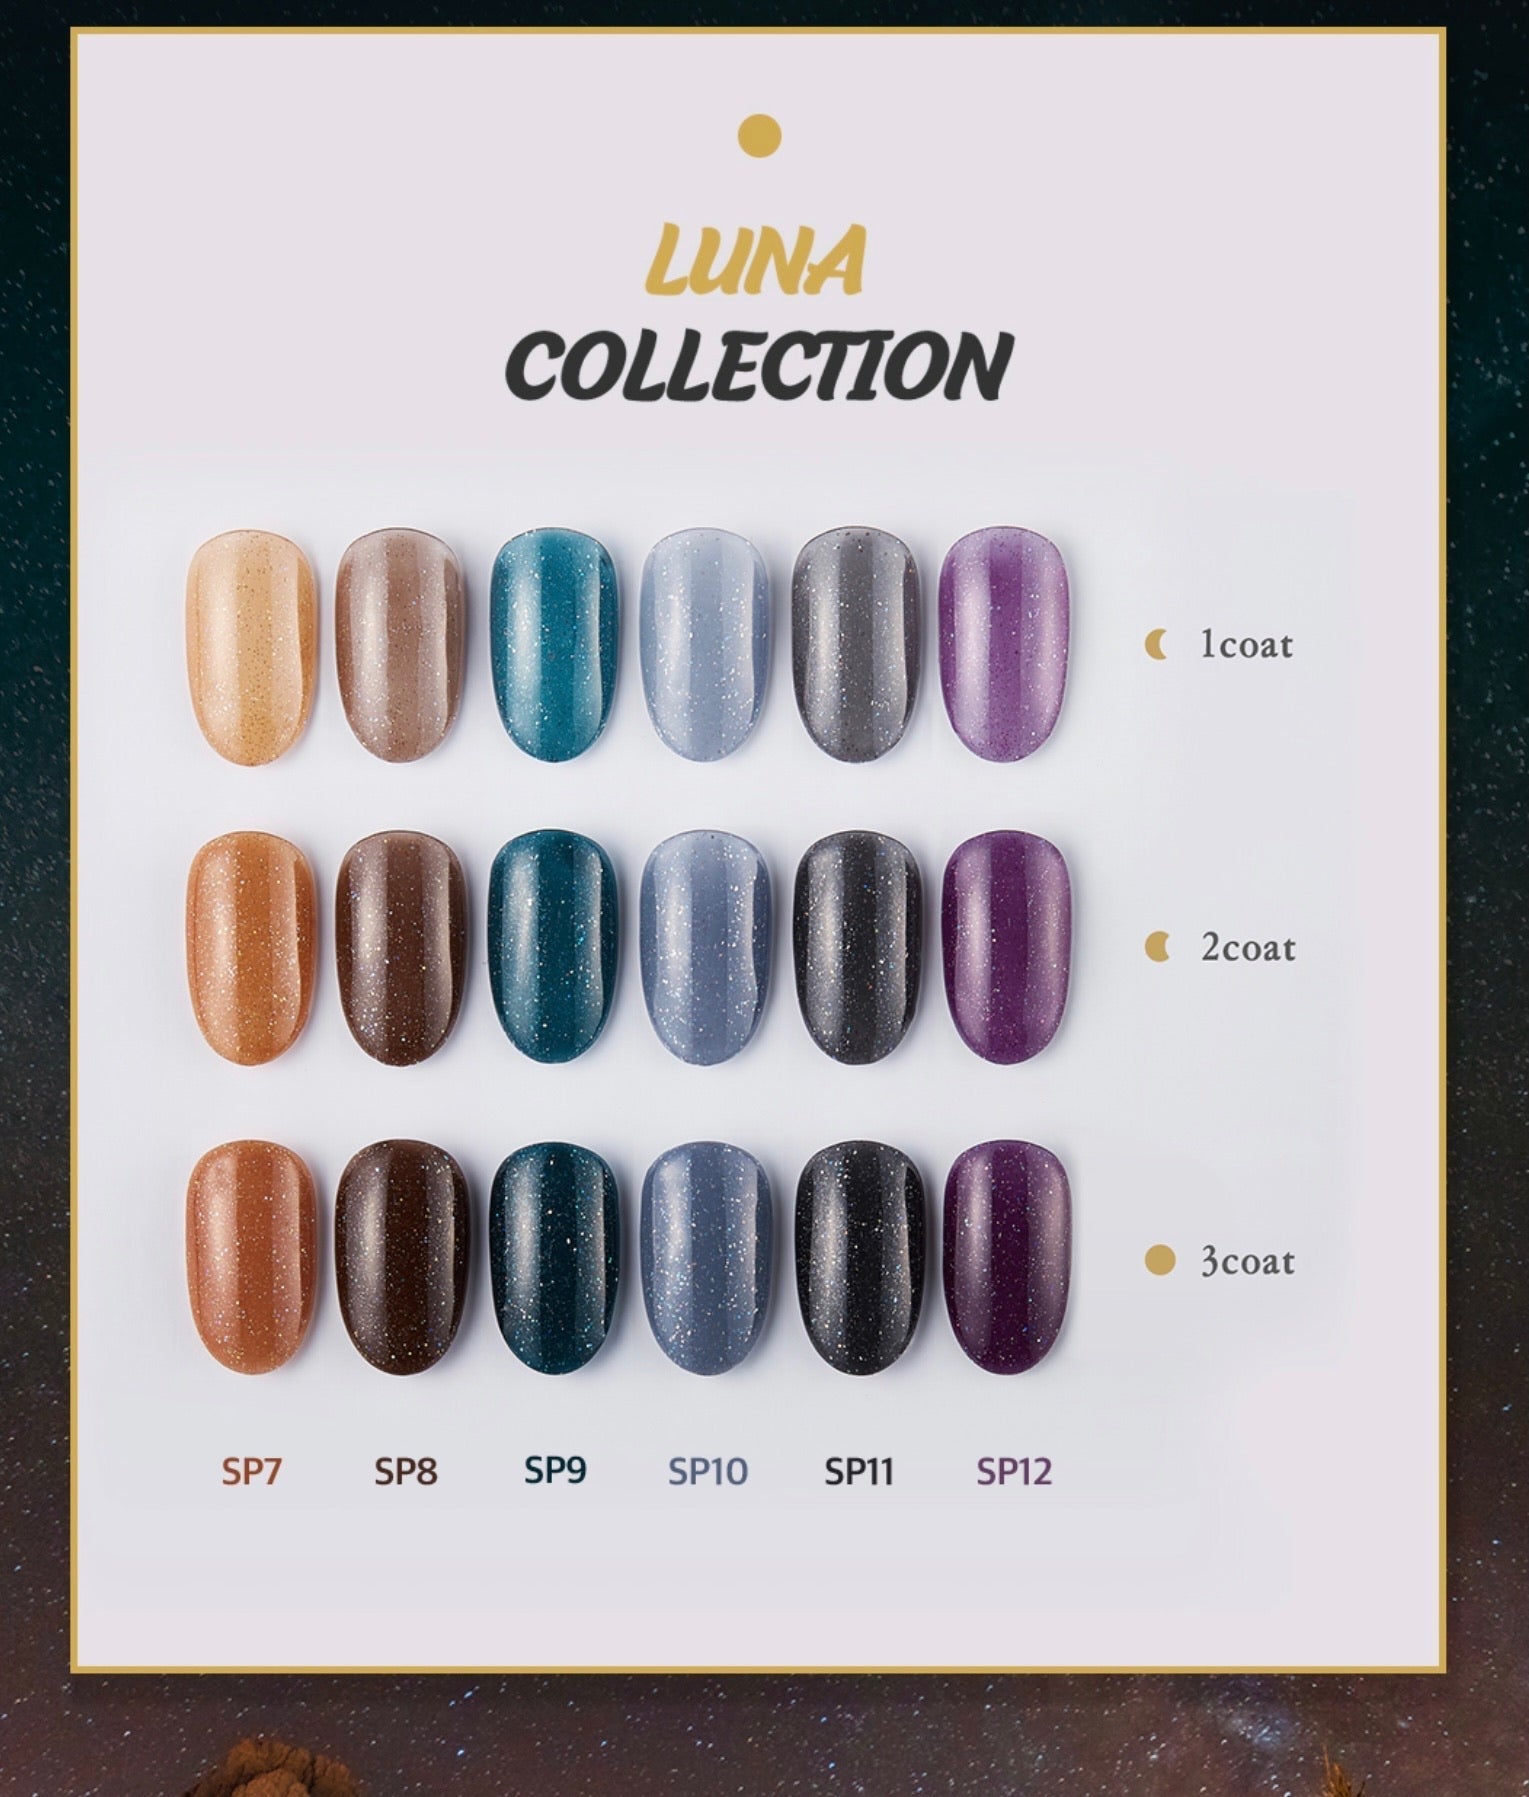 VERY GOOD NAIL Luna 6pc collection/individual